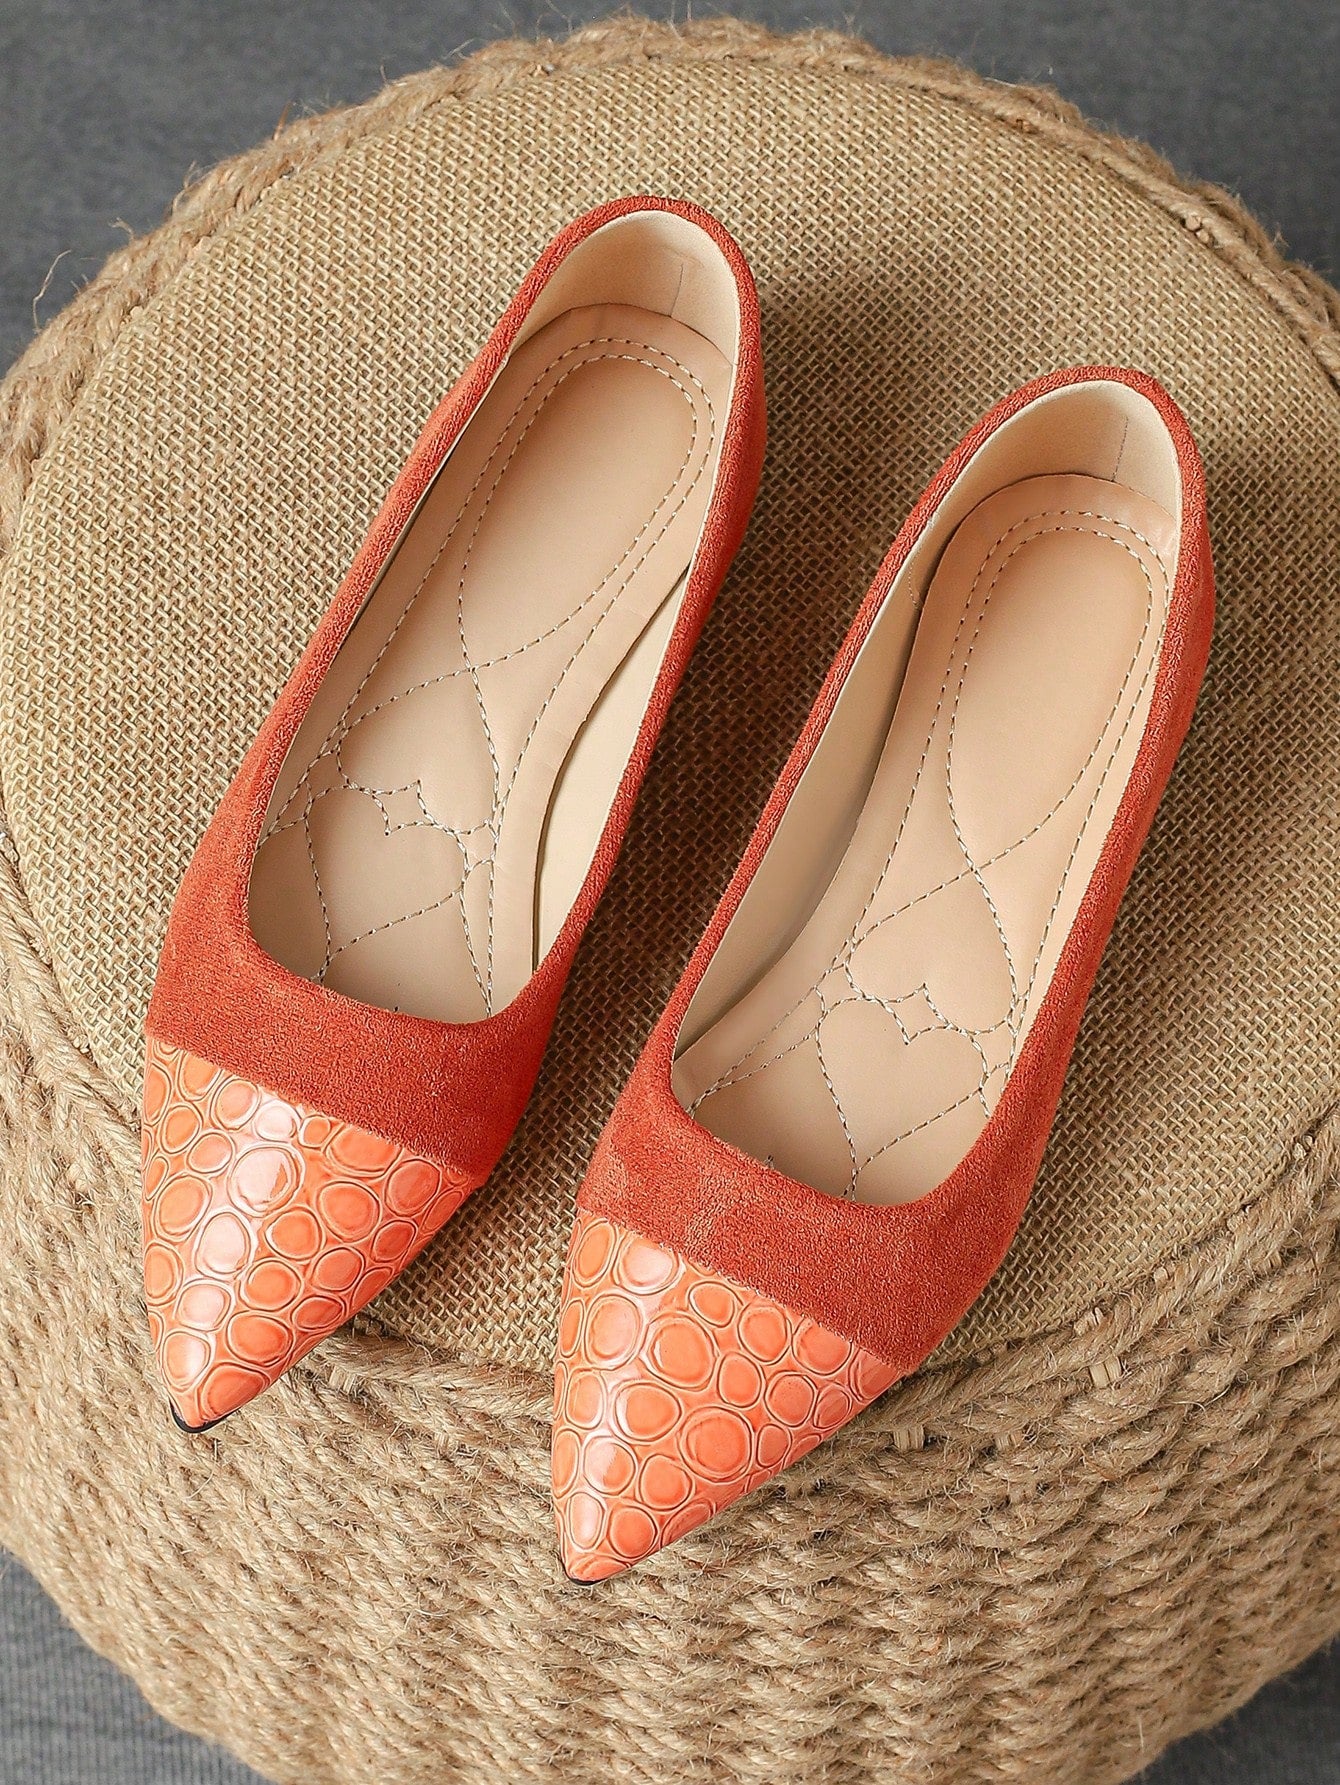 Women's Spliced Pointed Toe Flat Shoes, Suitable For Daily, Commute, Work, Autumn. Black Color-Orange-1